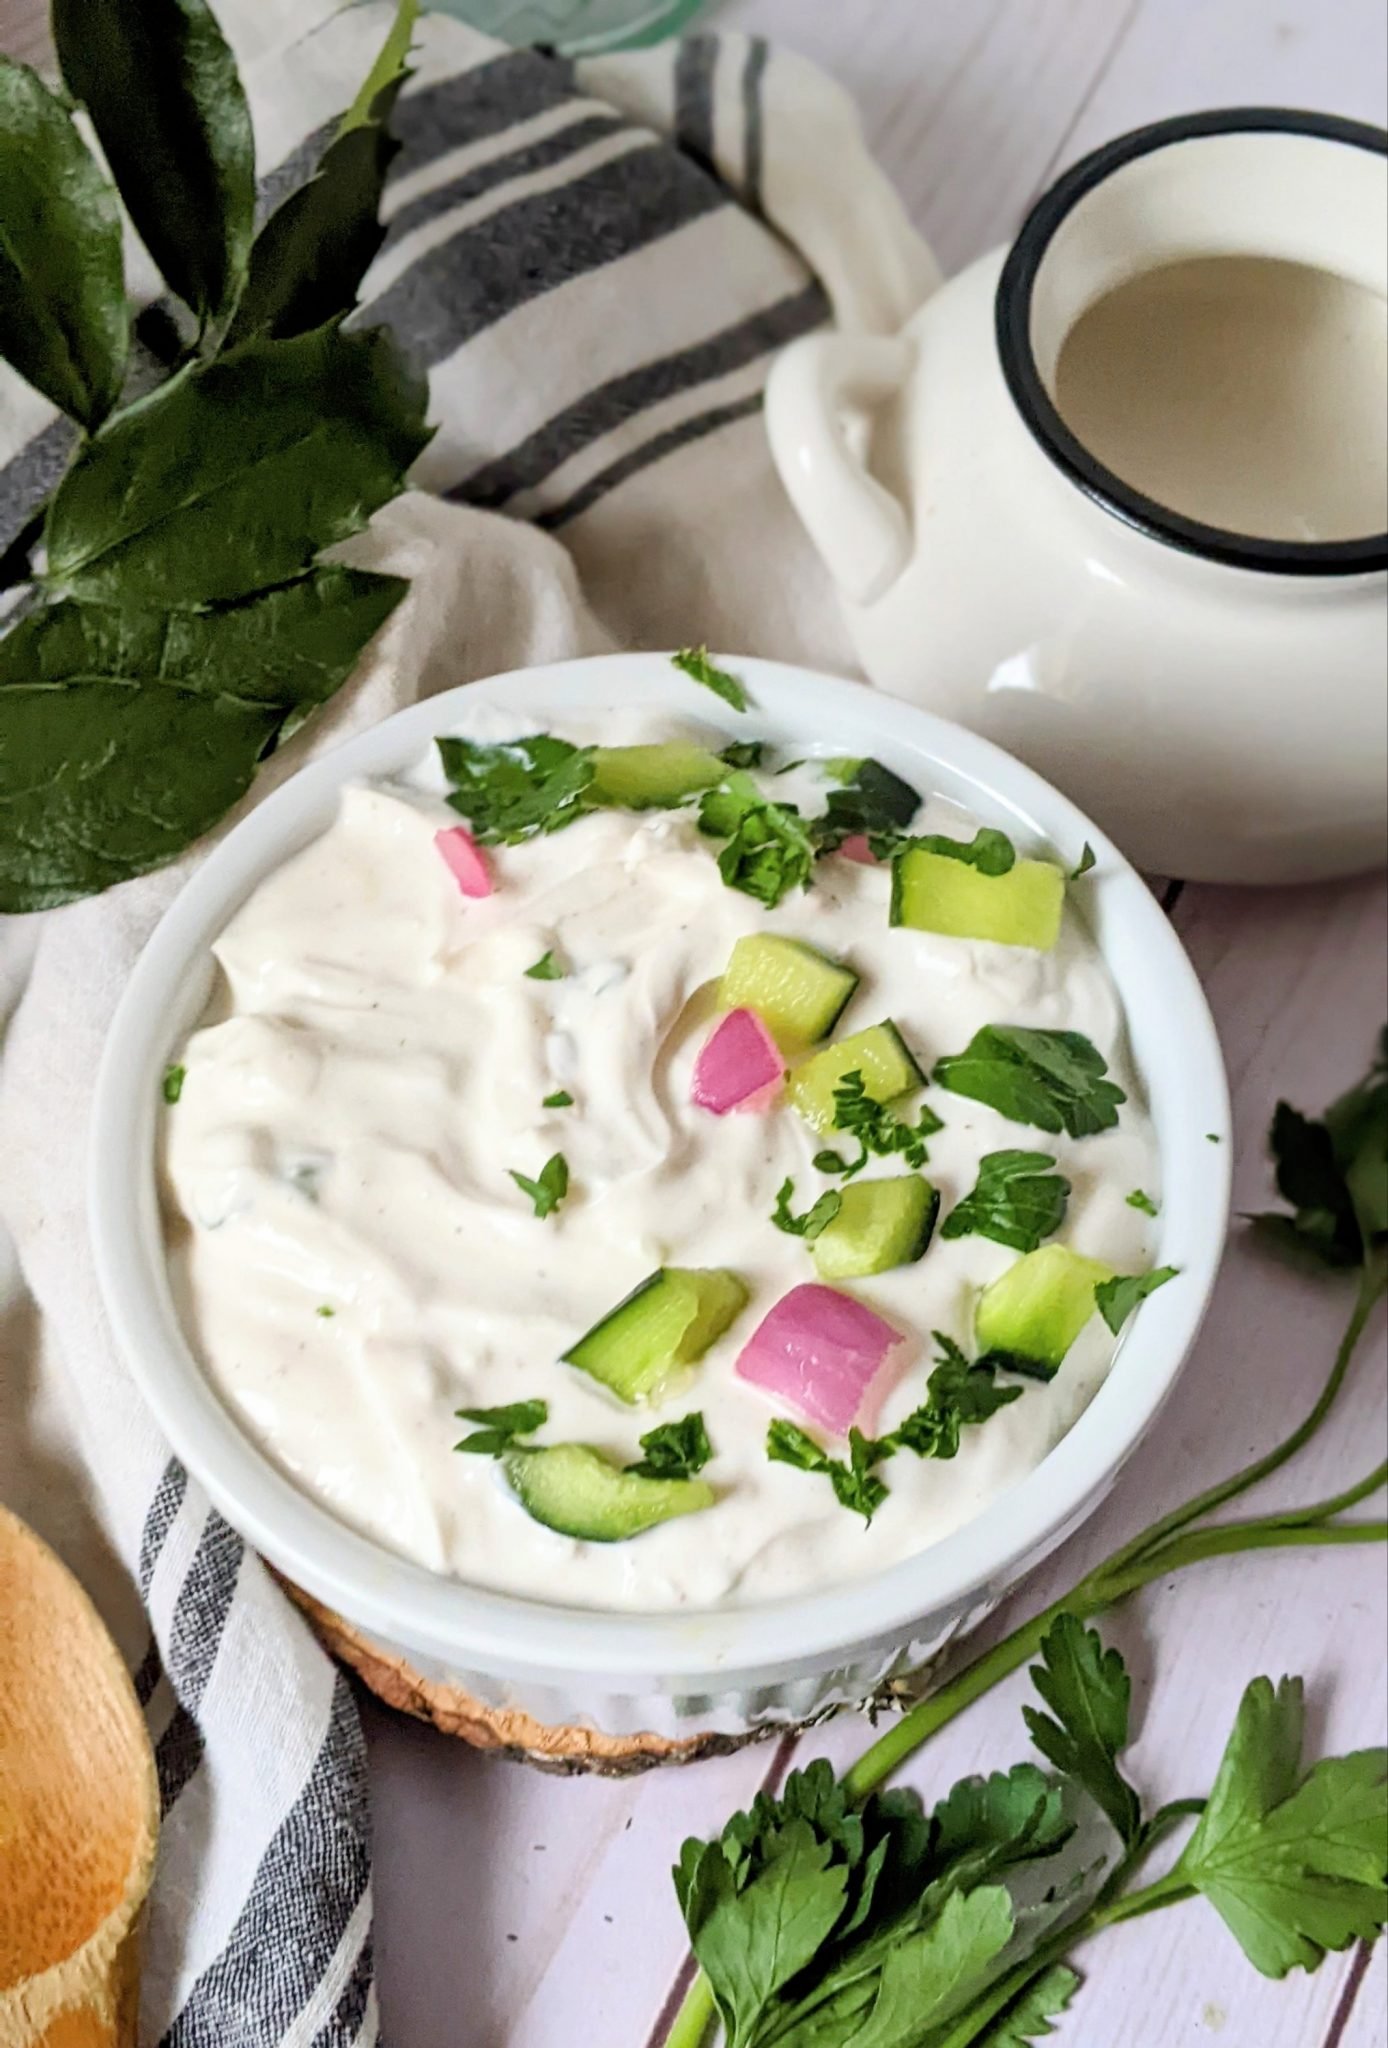 no salt added tzatziki dip low sodium party dip recipes easy dips without salt healthy low sodium creamy sauce recipes or greek recipes no salt added